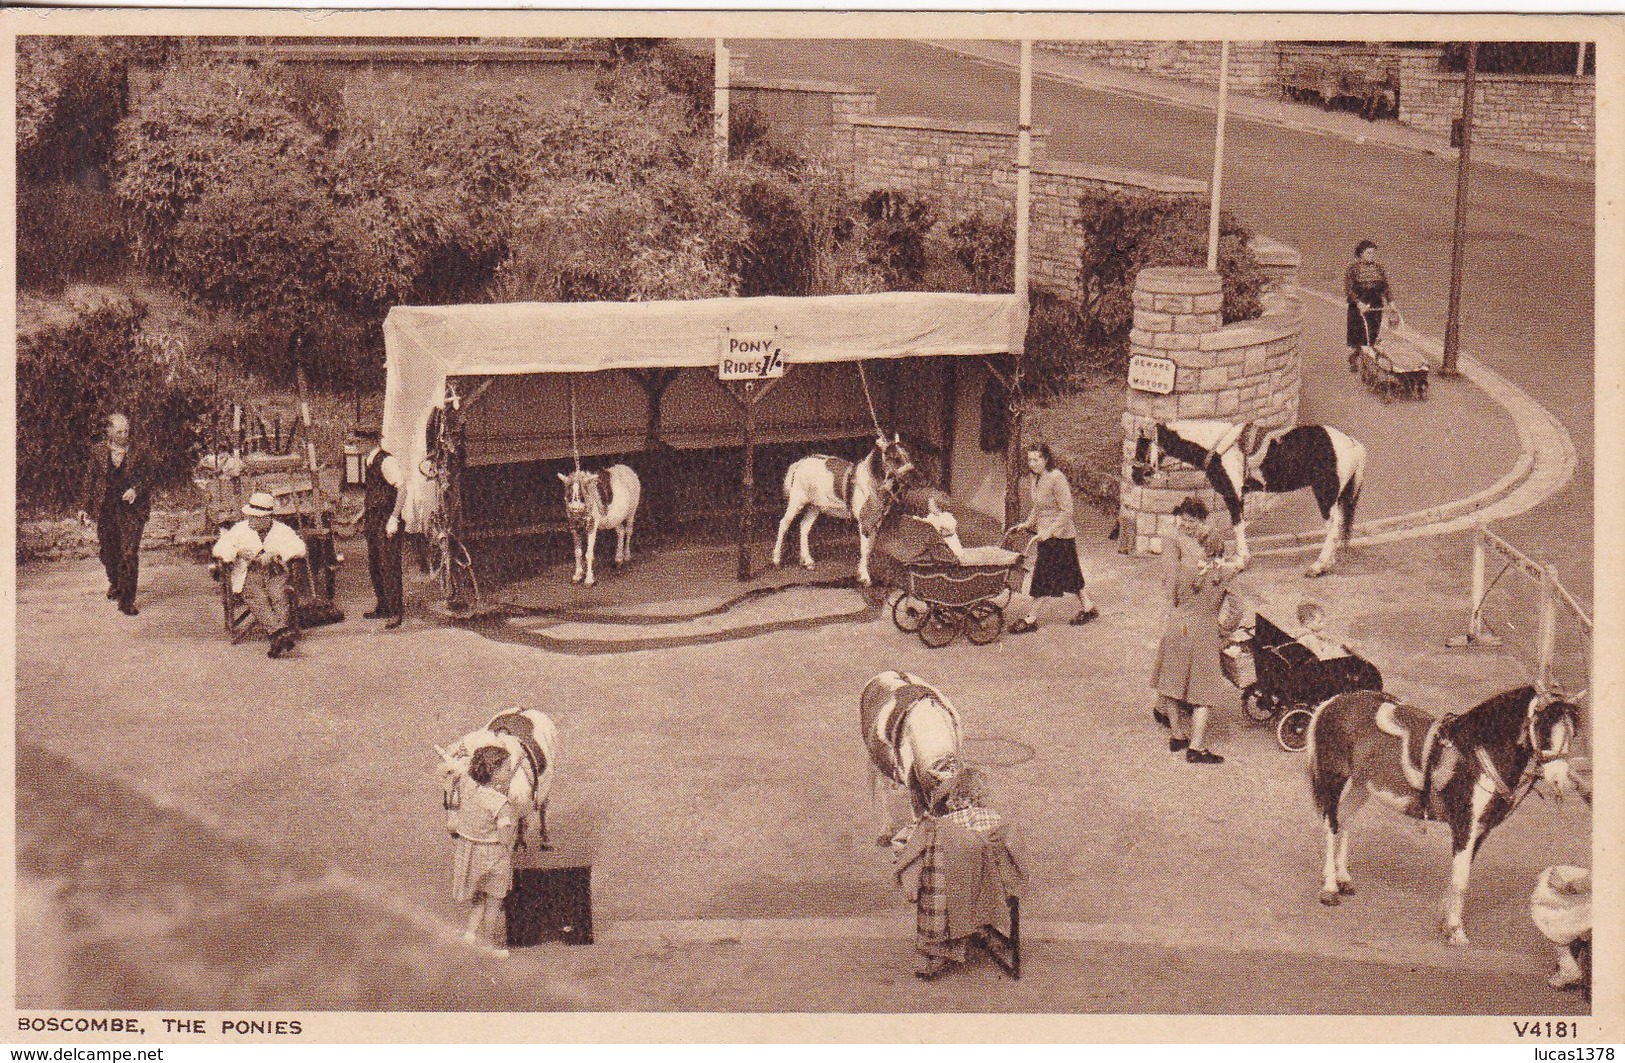 BOURNEMOUTH : BOSCOMBE - THE PONIES - Bournemouth (until 1972)